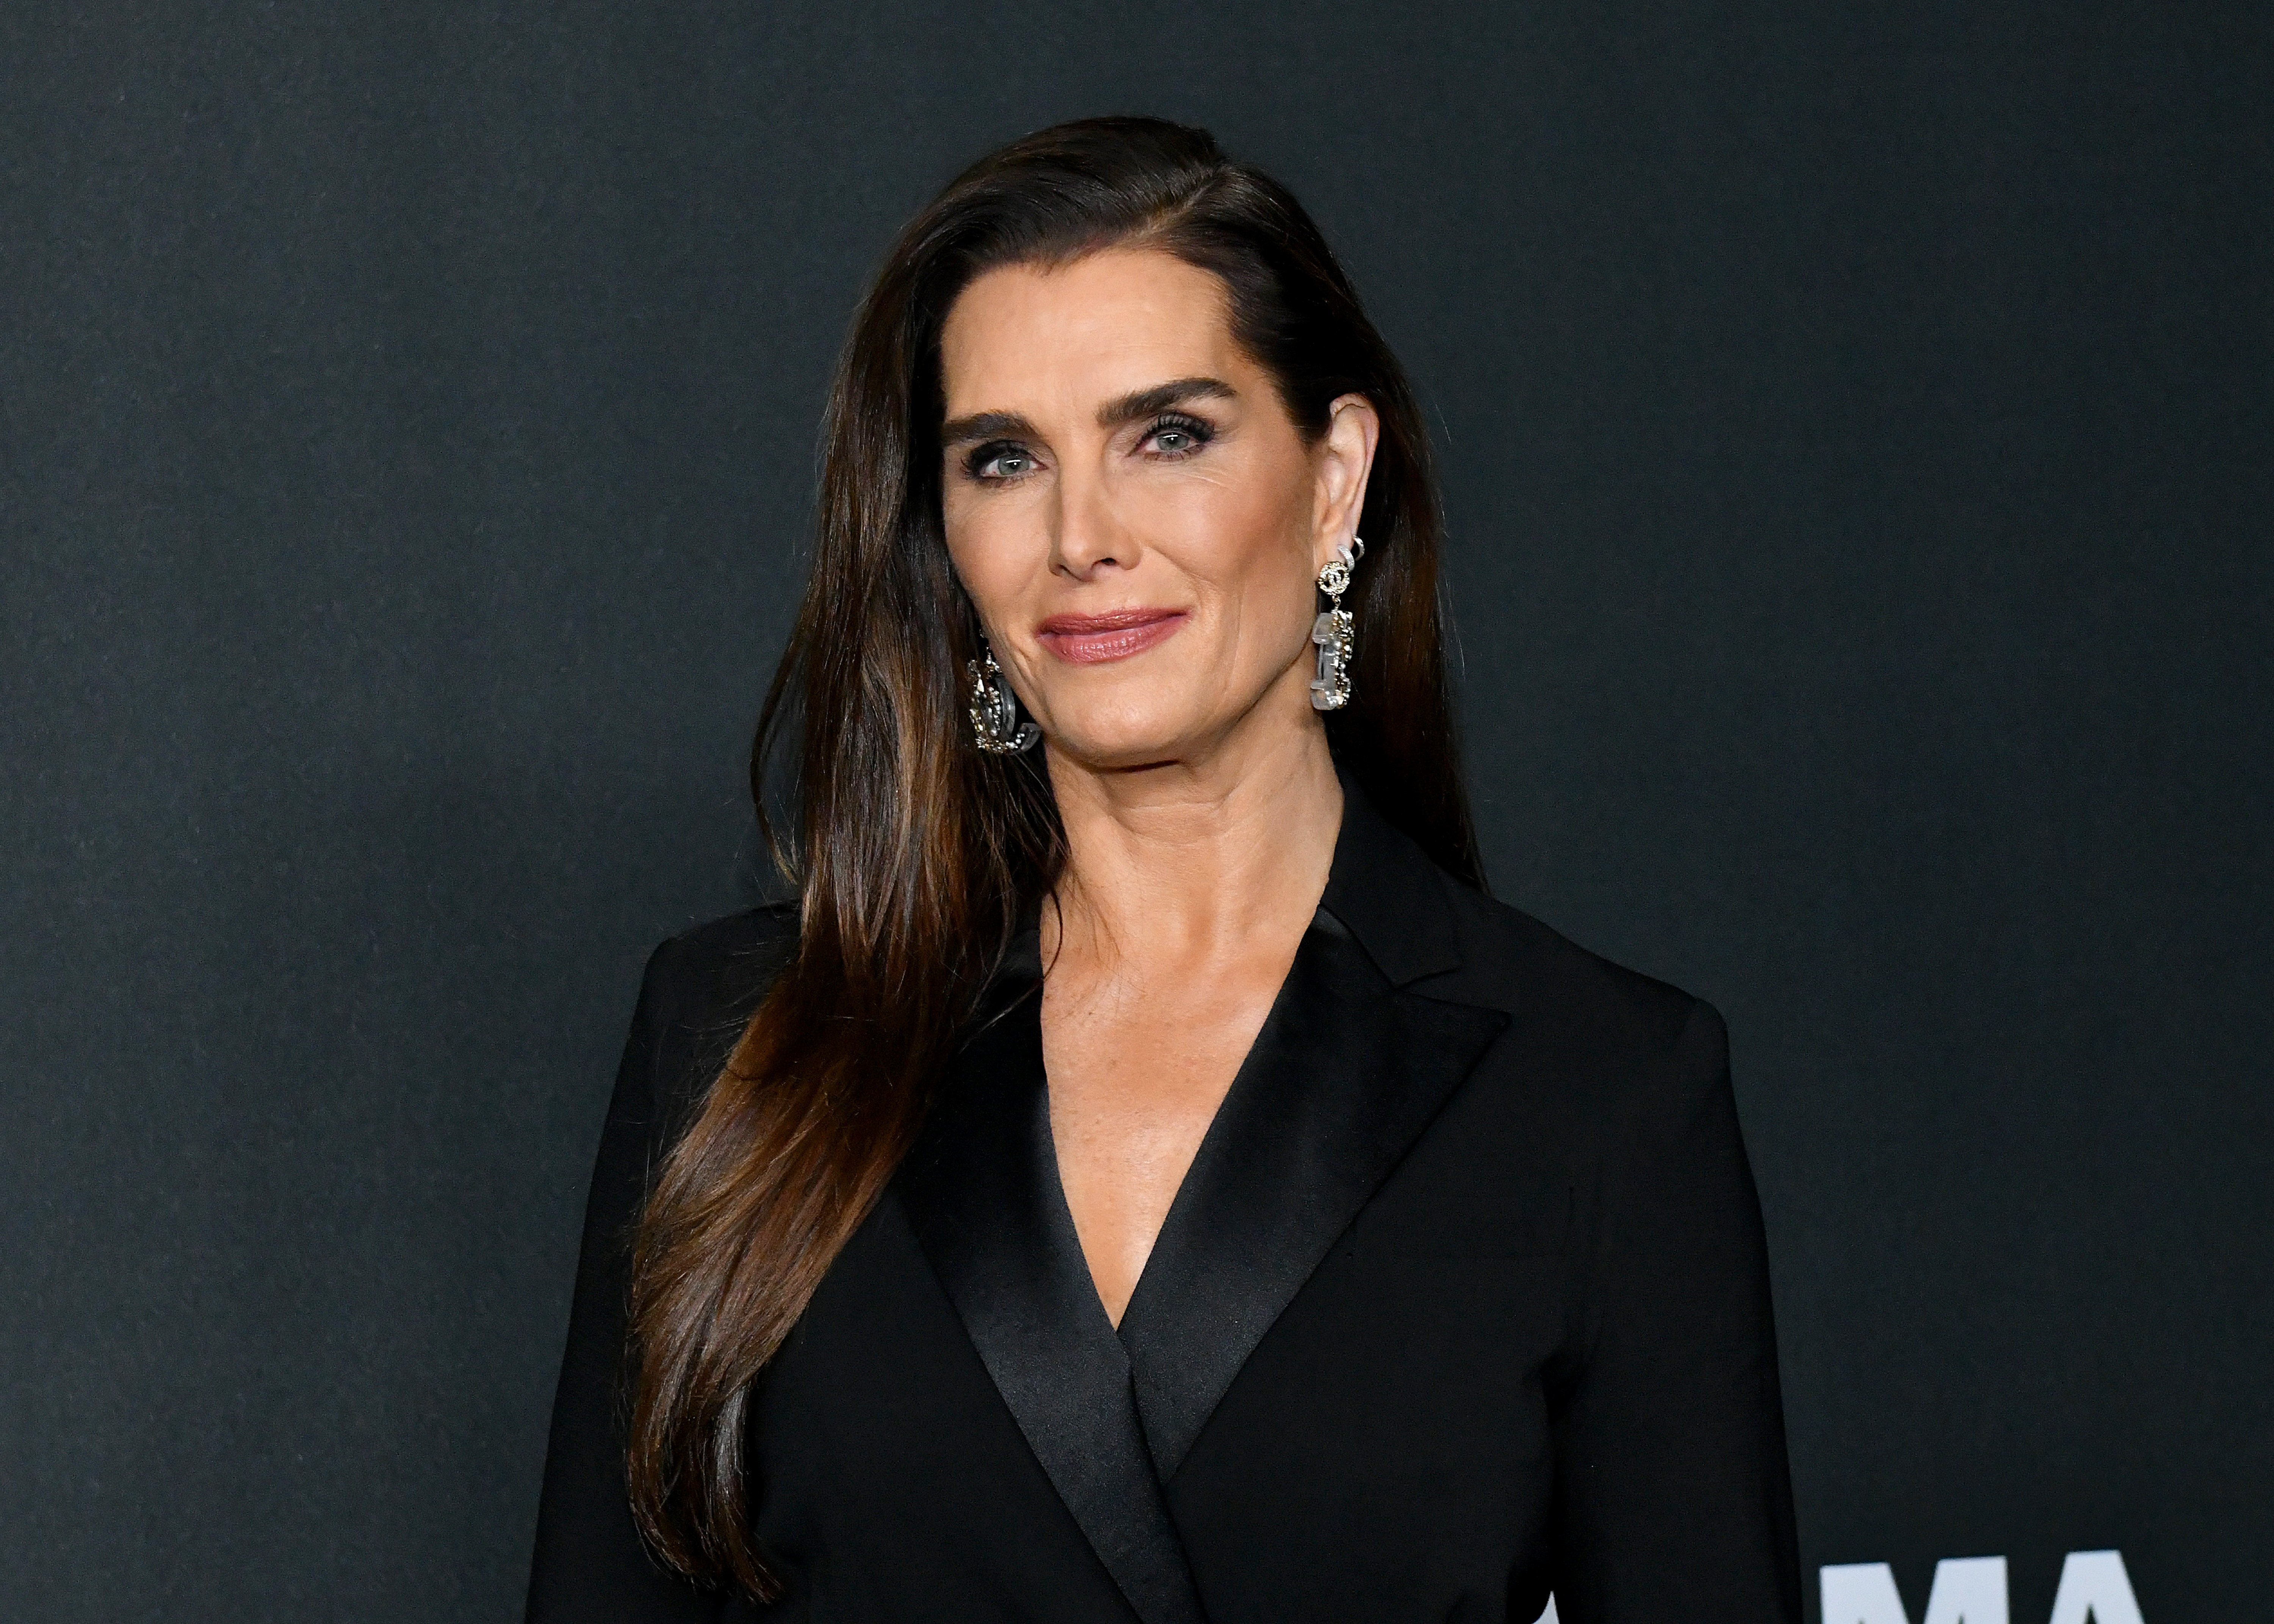 Brooke Shields attends MoMA's Twelfth Annual Film Benefit on November 12. | Source: Getty Images